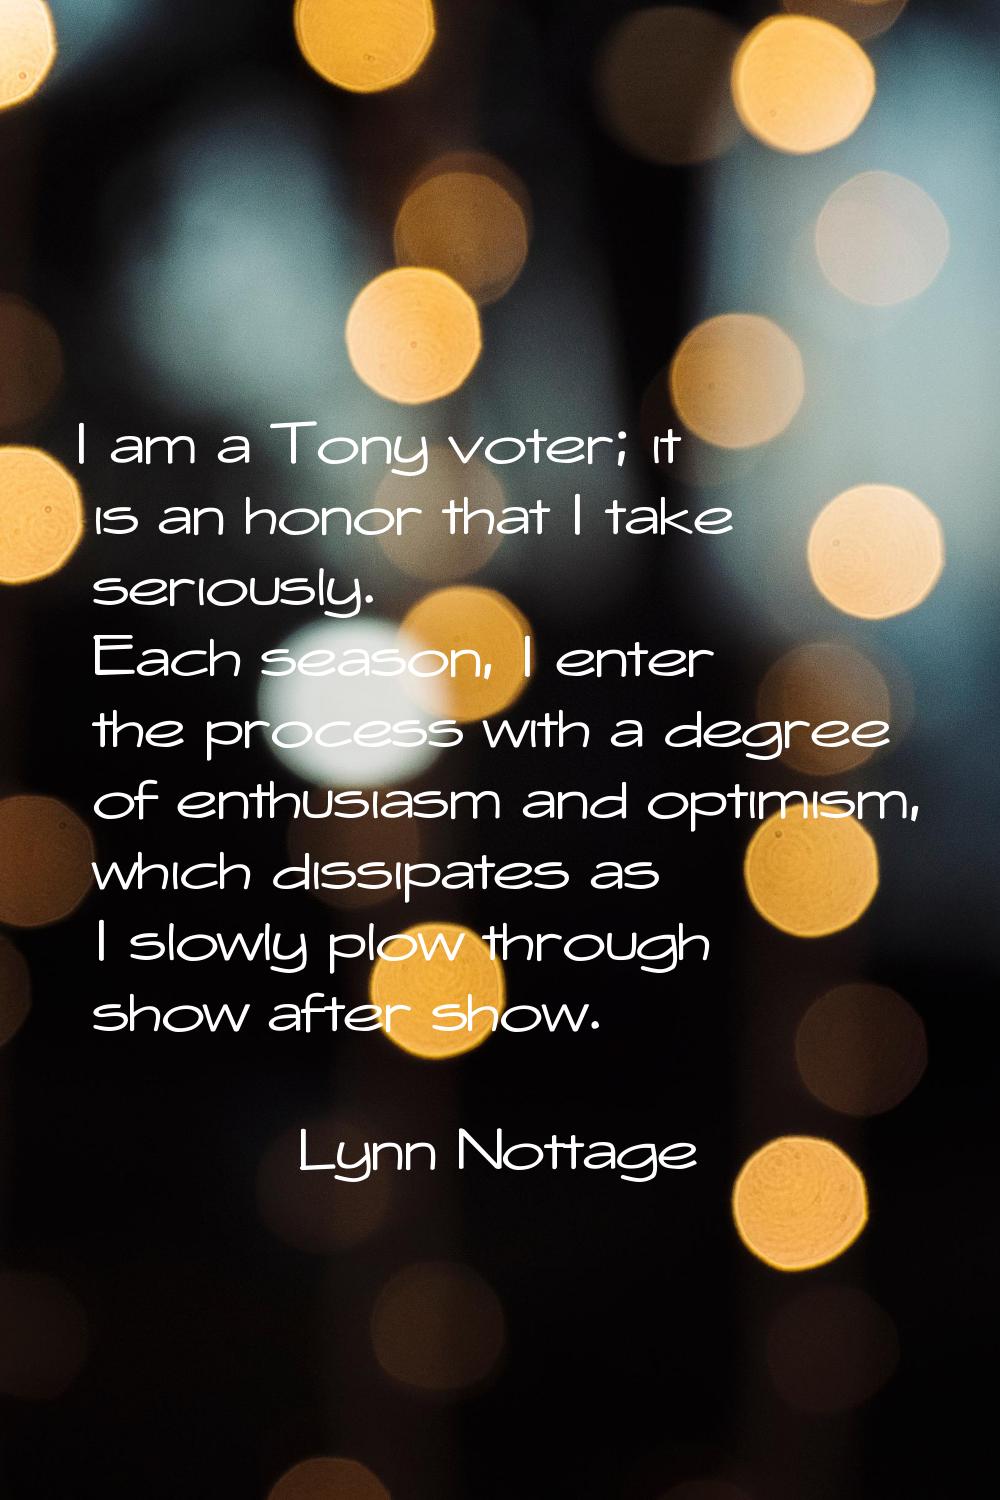 I am a Tony voter; it is an honor that I take seriously. Each season, I enter the process with a de